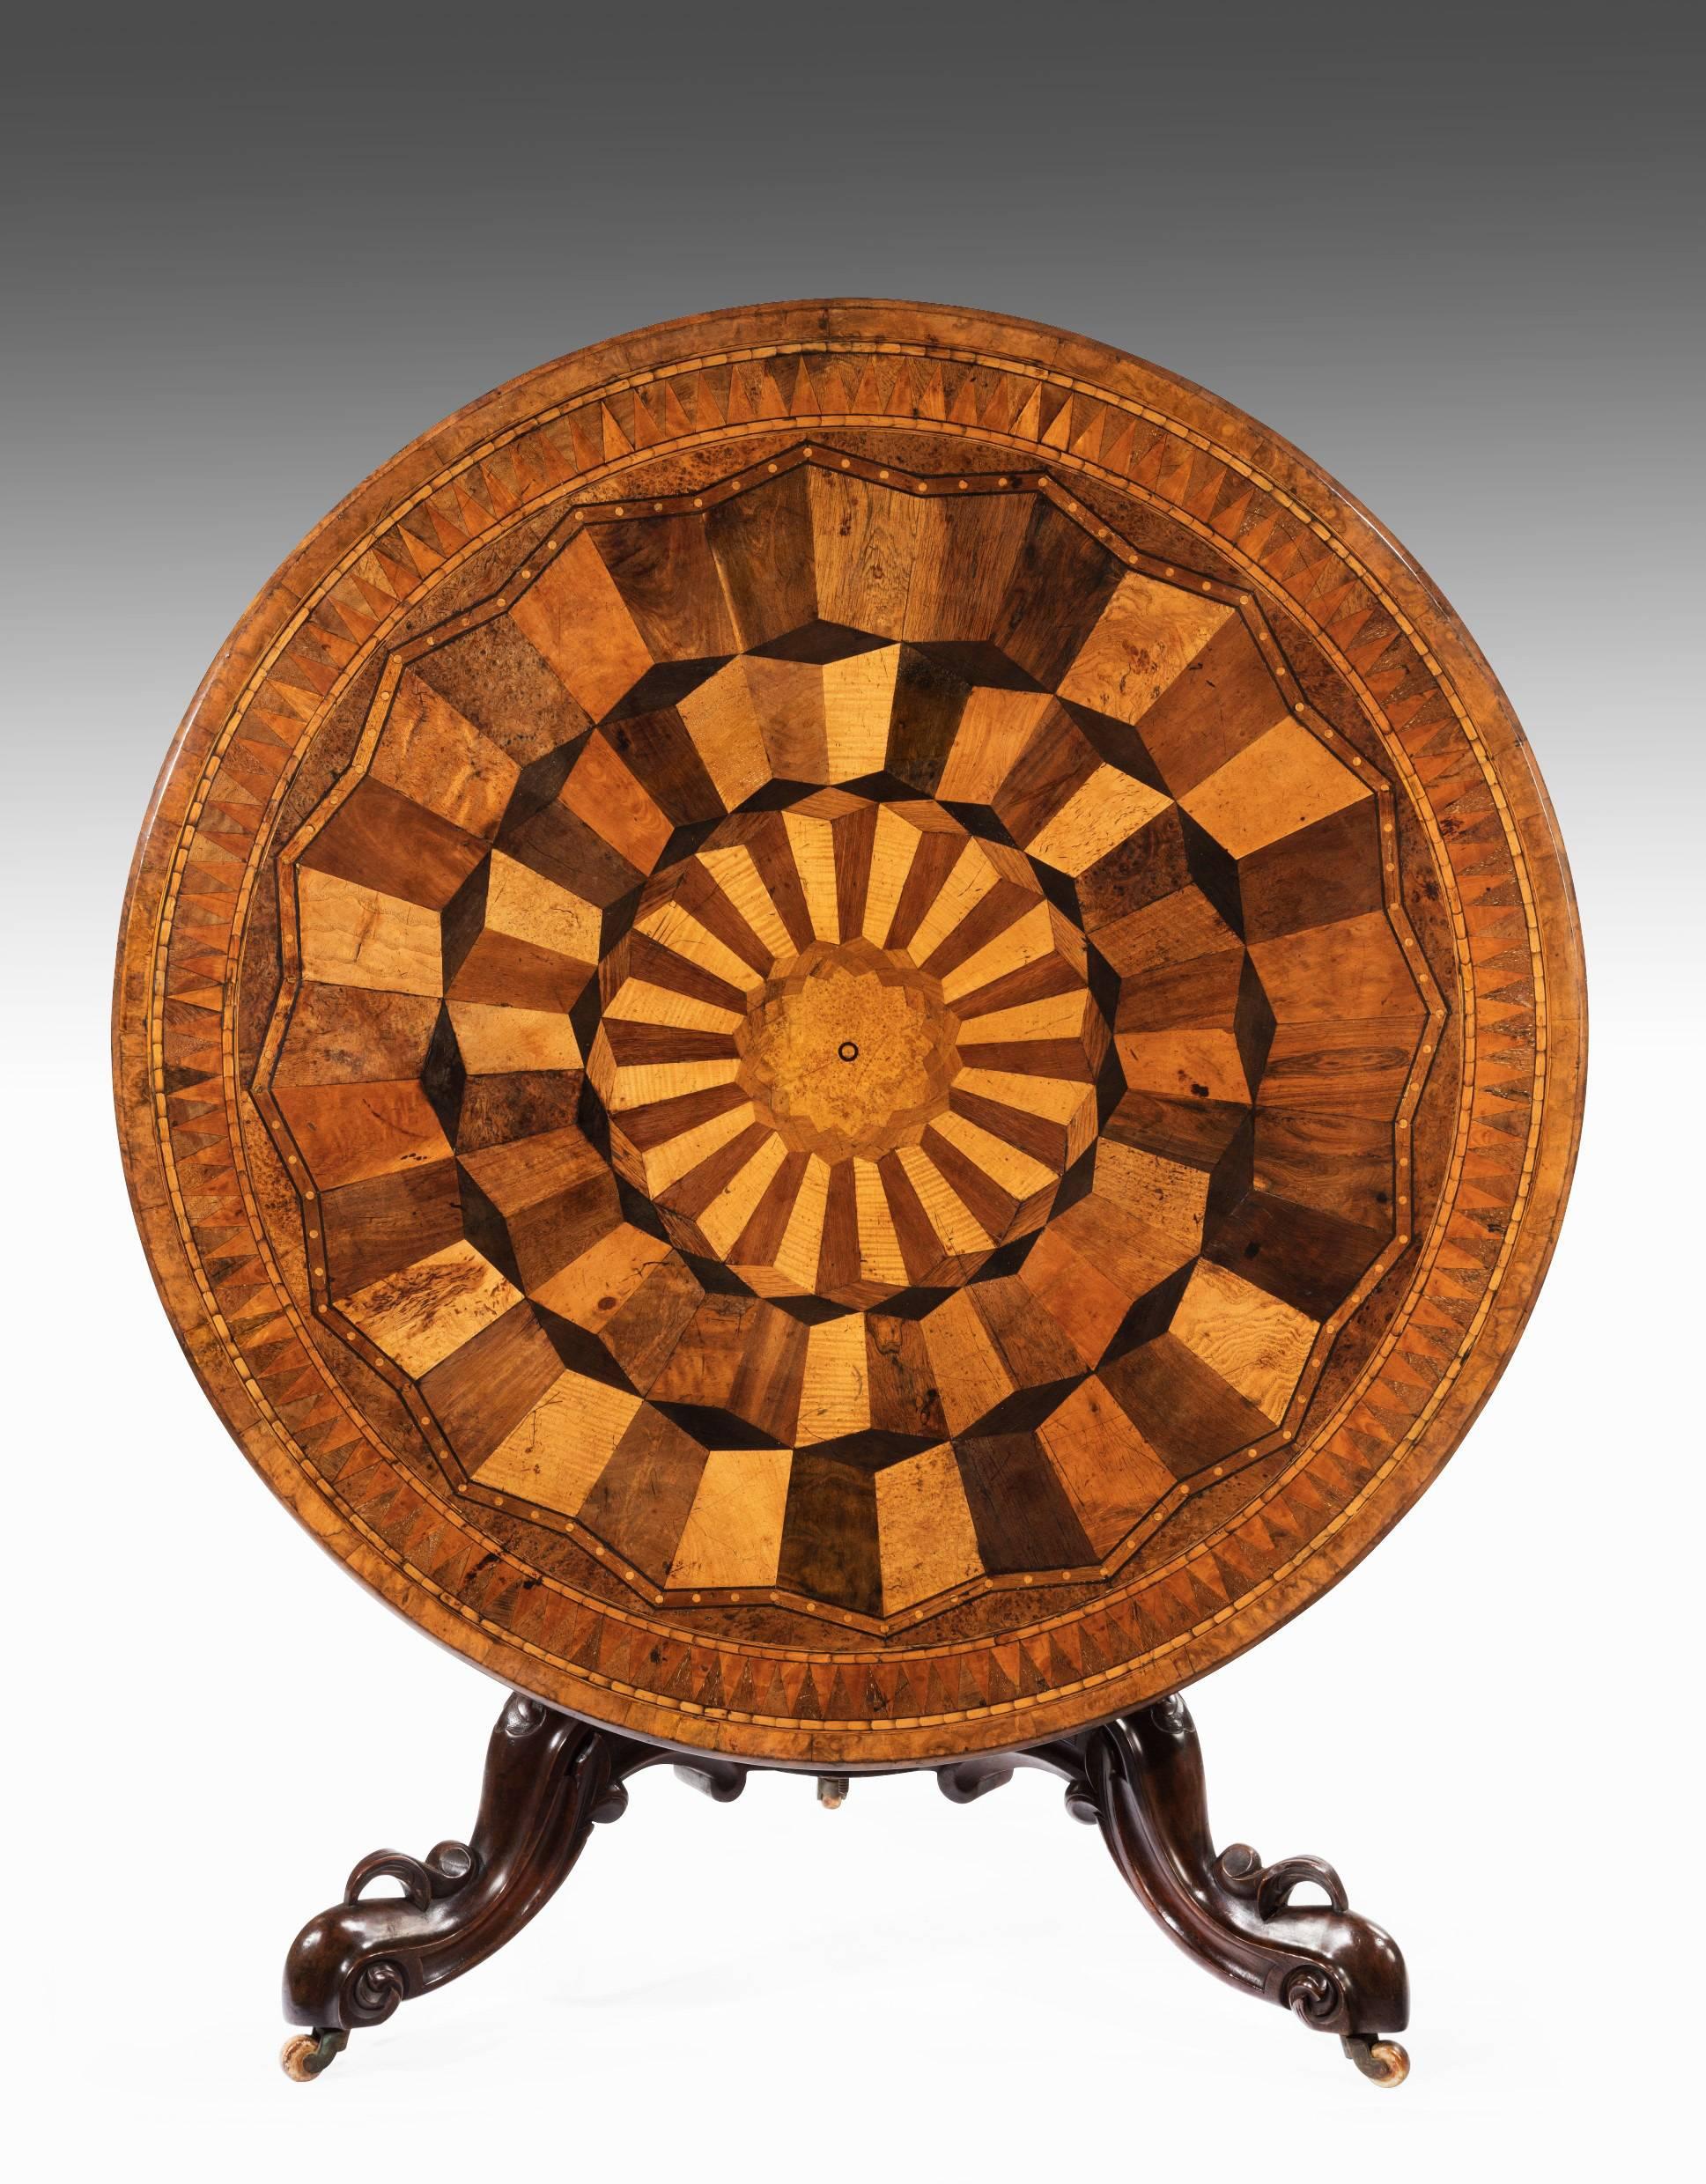 An exceptionally fine and rare mid-19th-century exotic specimen wood table.
This superb quality table of large proportions has a circular top adorned with a multitude of exotic woods laid in parquetry form with a burr walnut crossbanded edge. The